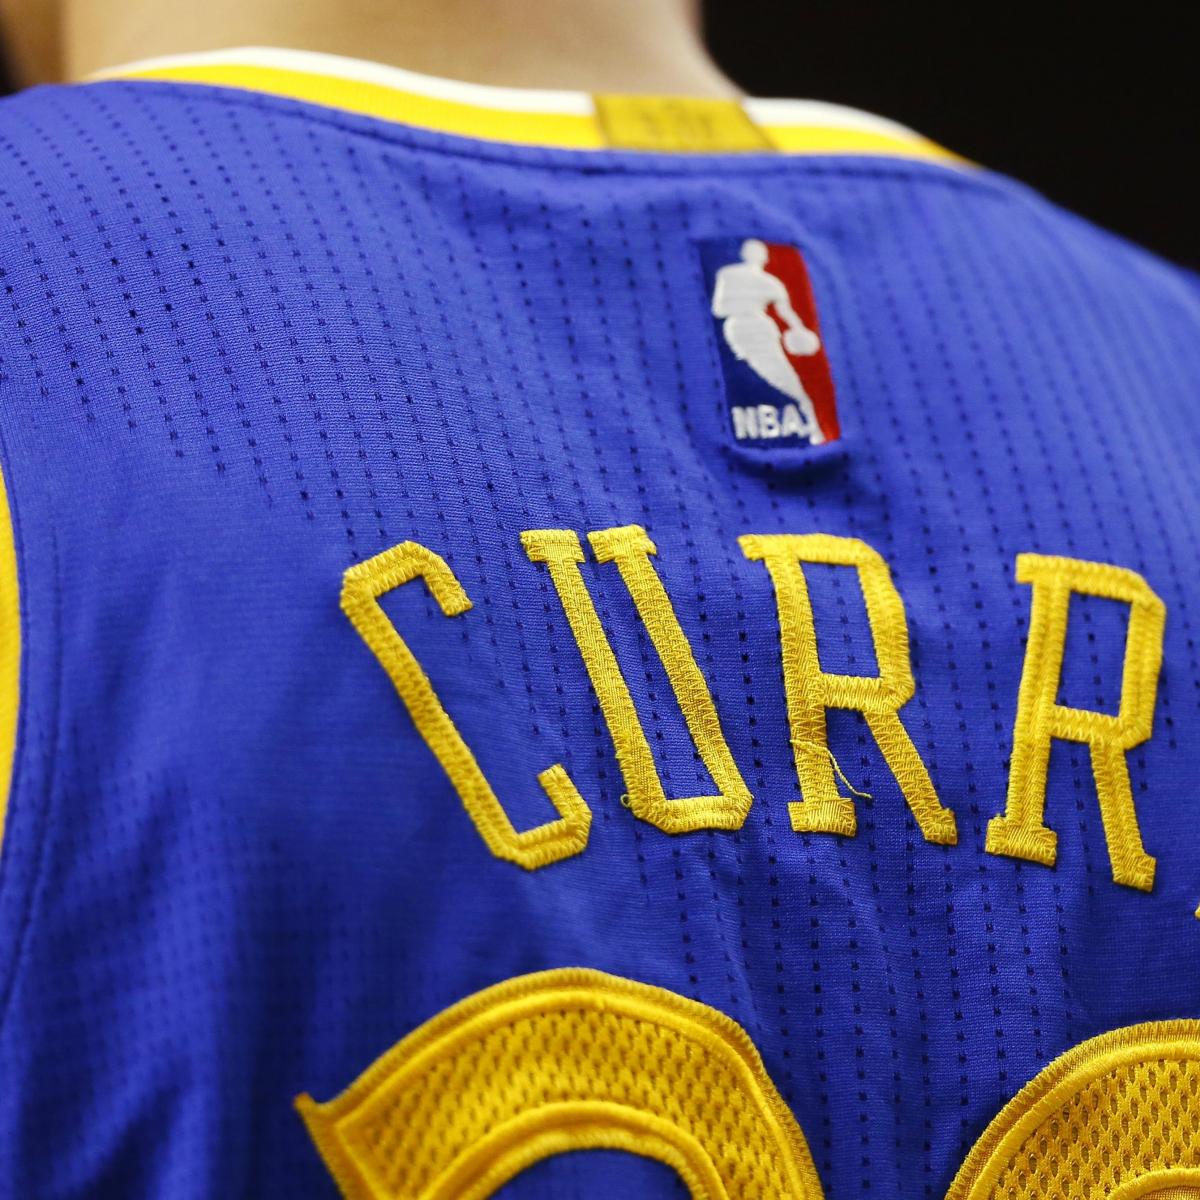 LeBron James, Steph Curry top NBA jersey sales anew